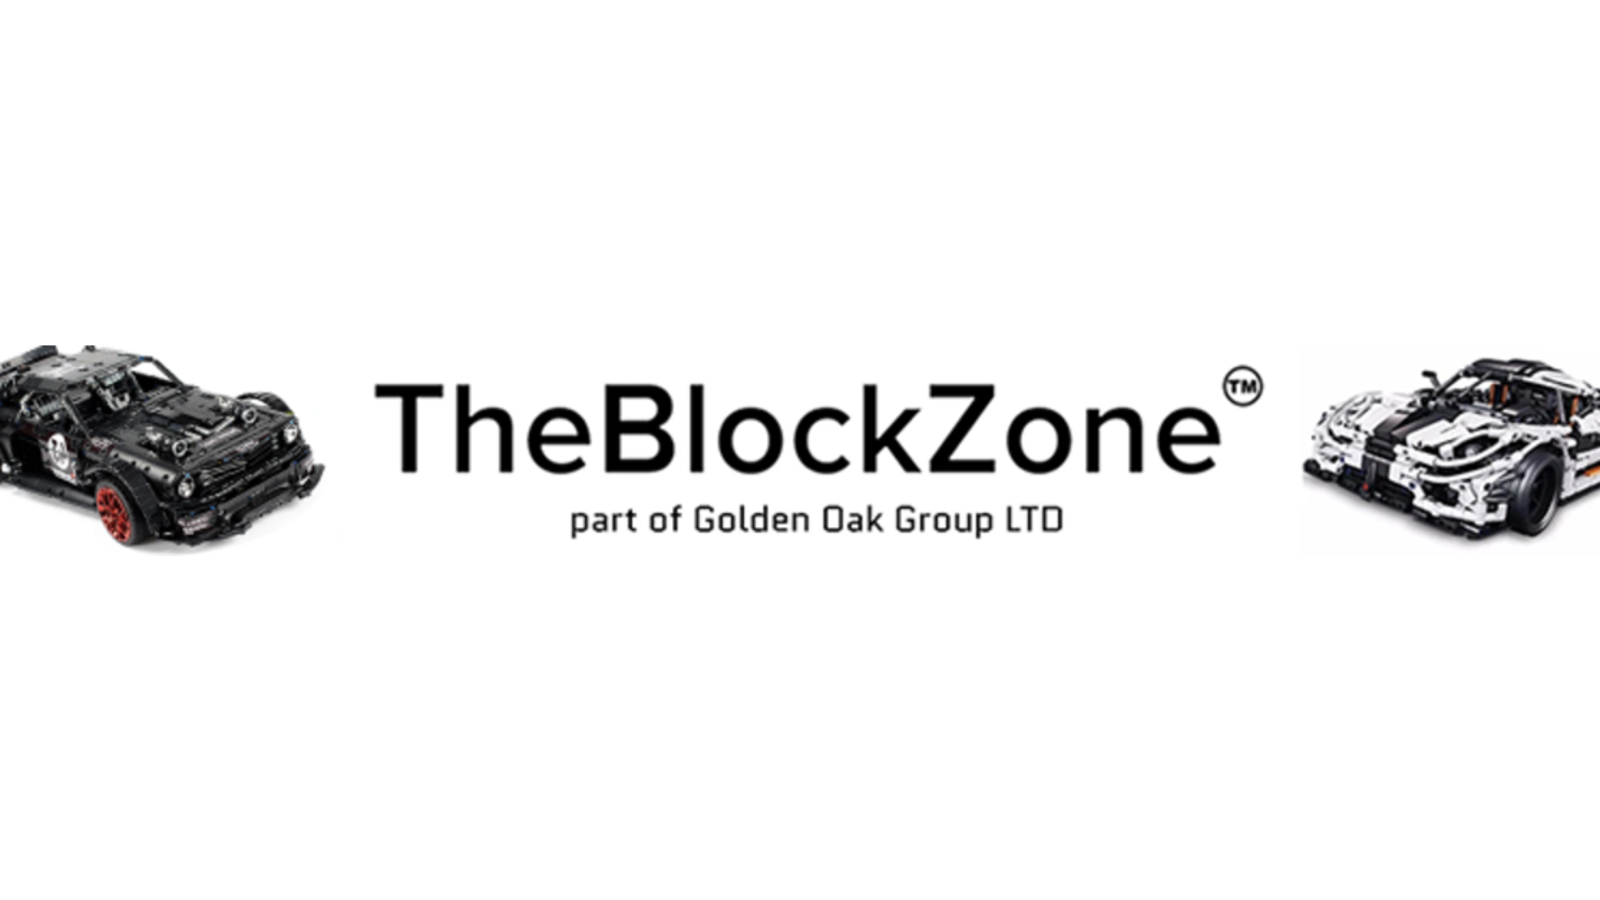 Illustration for article titled Blockzone mini review